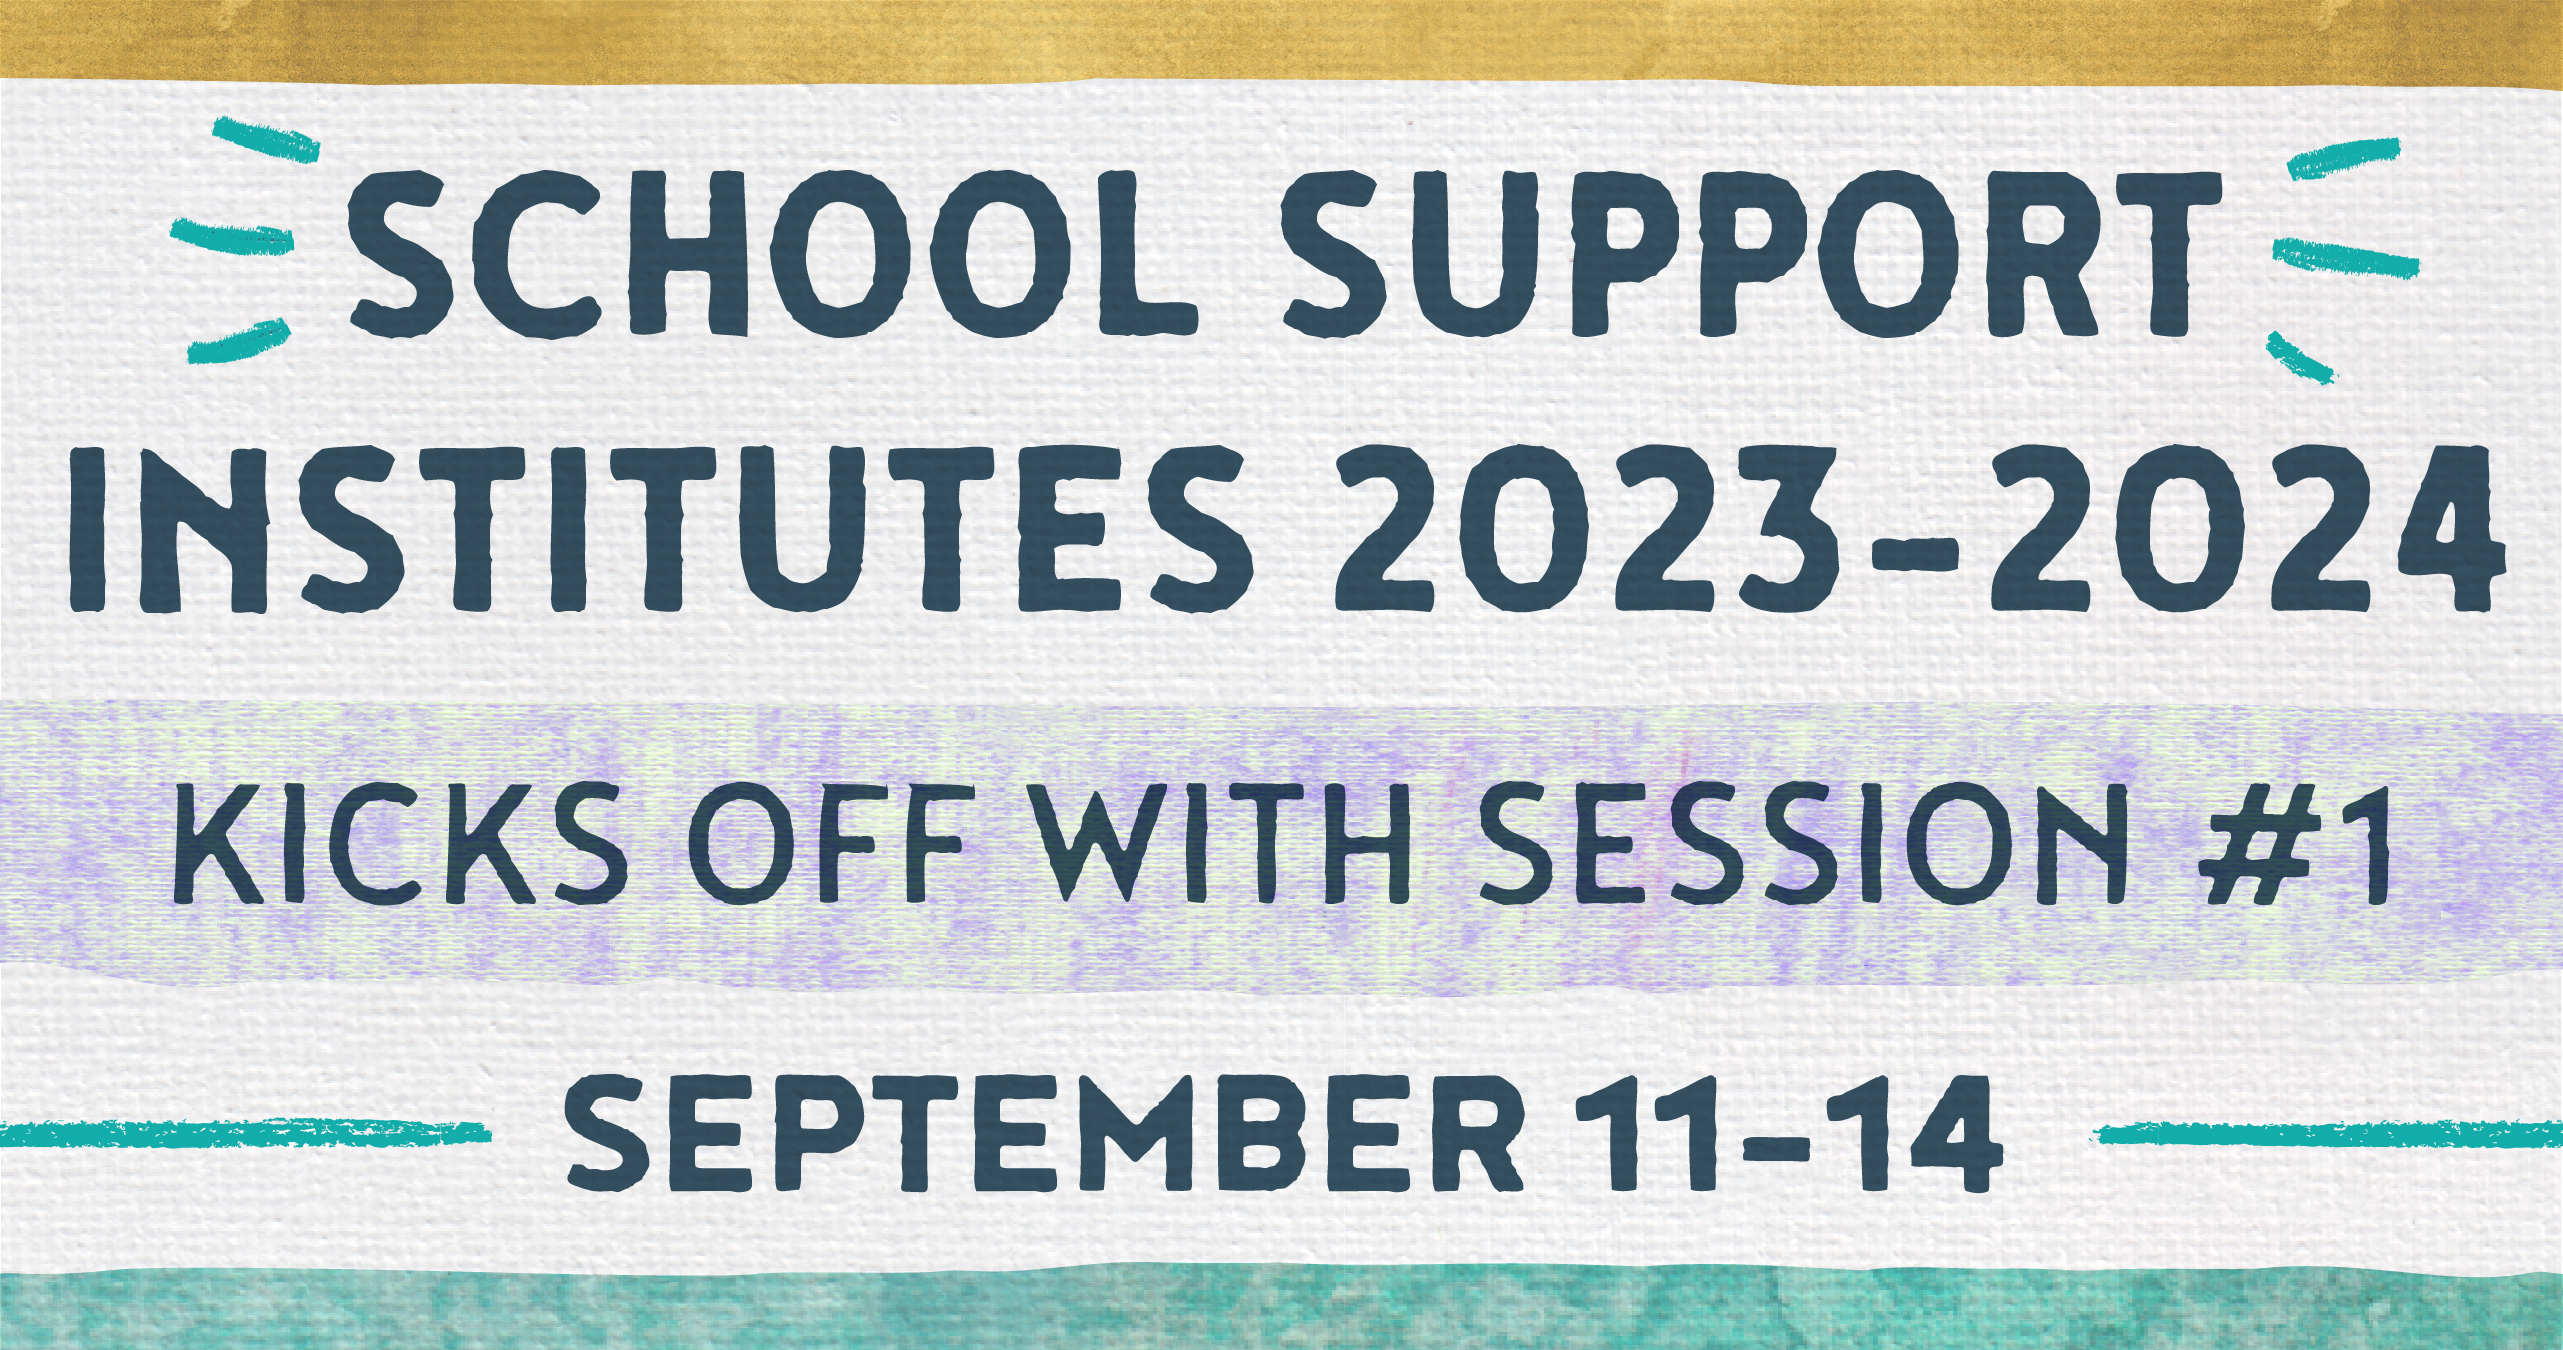 School Support Institutes 2023-2024 Kicks Off With Session Number 1, Septemeber 11-14.